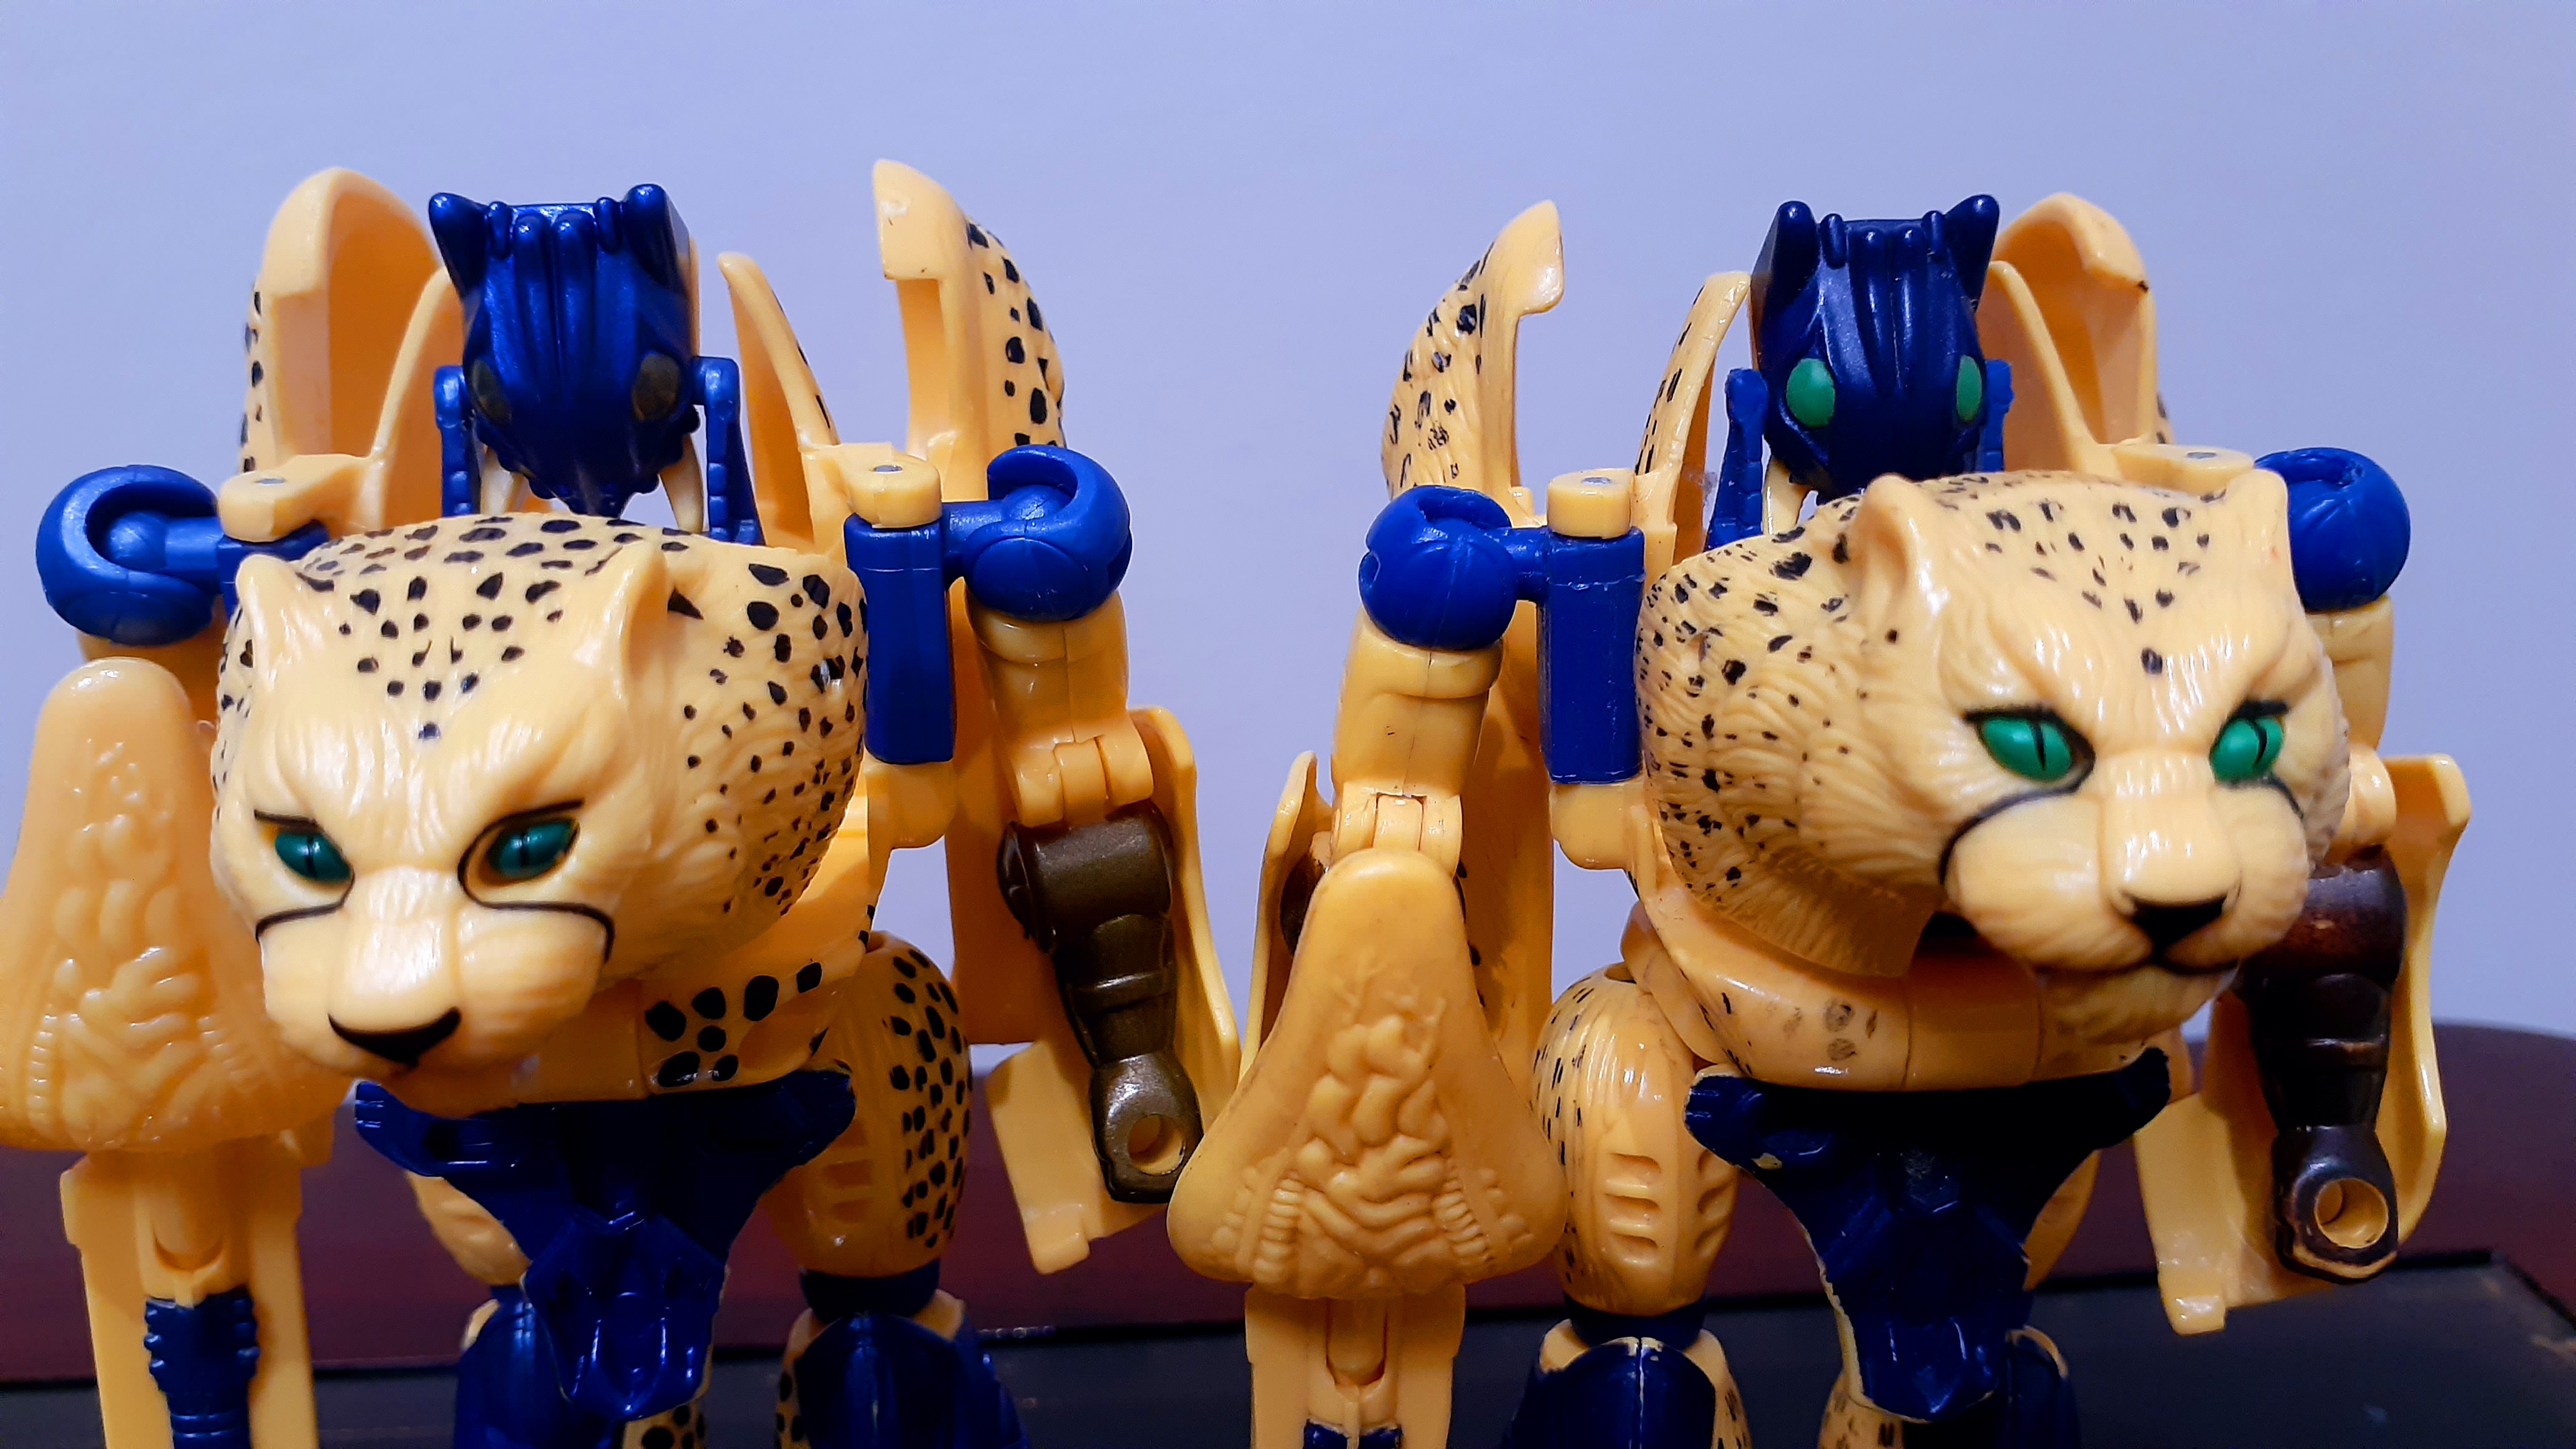 Pictorial Review of 2021 Beast Wars Cheetor Reissue with